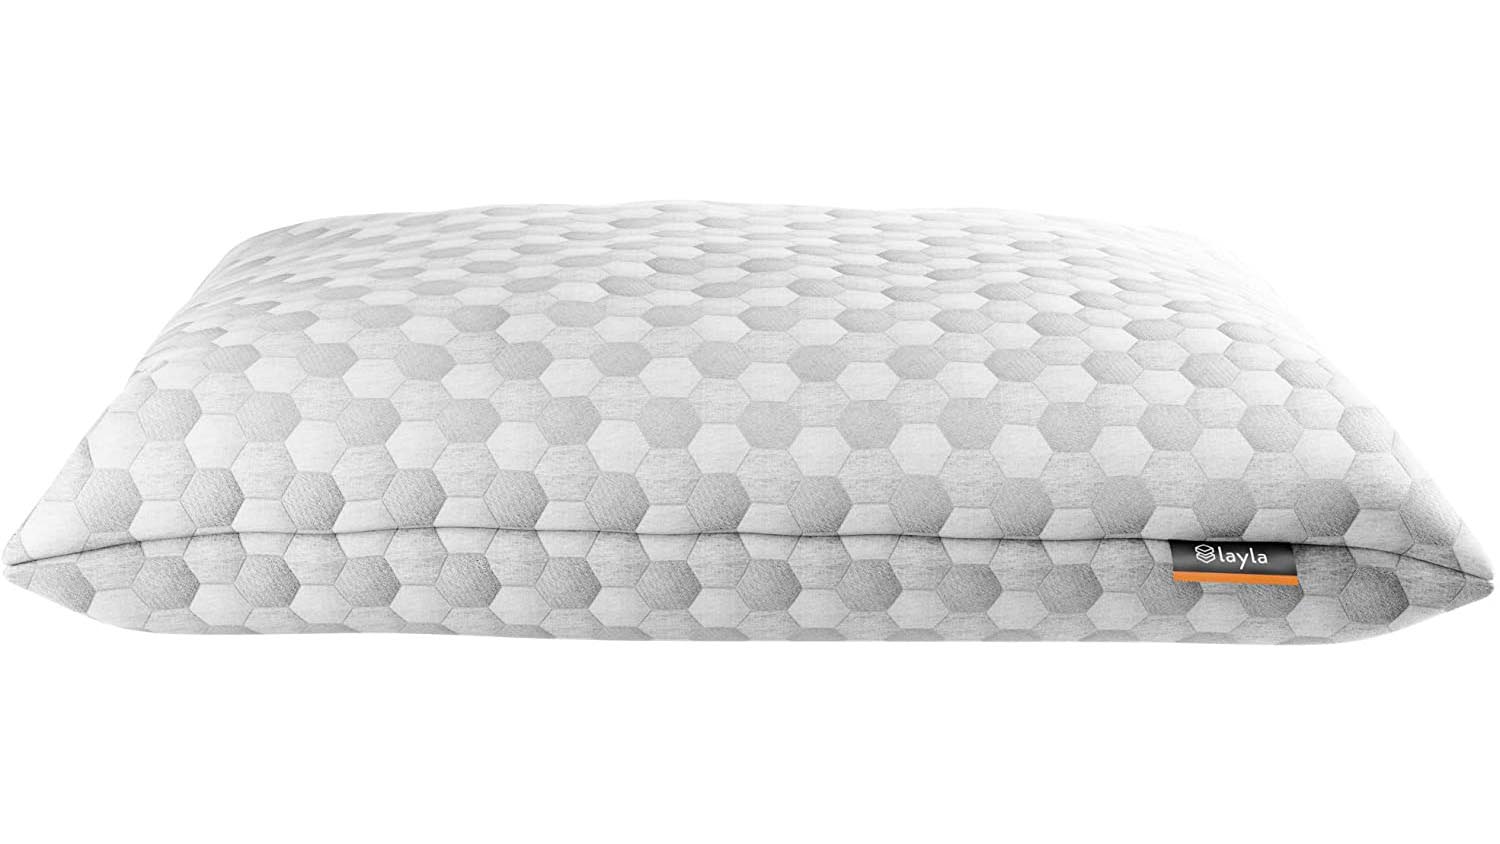 Layla Kapok Pillow review: a queen size pillow shown from the side with the Layla logo on view